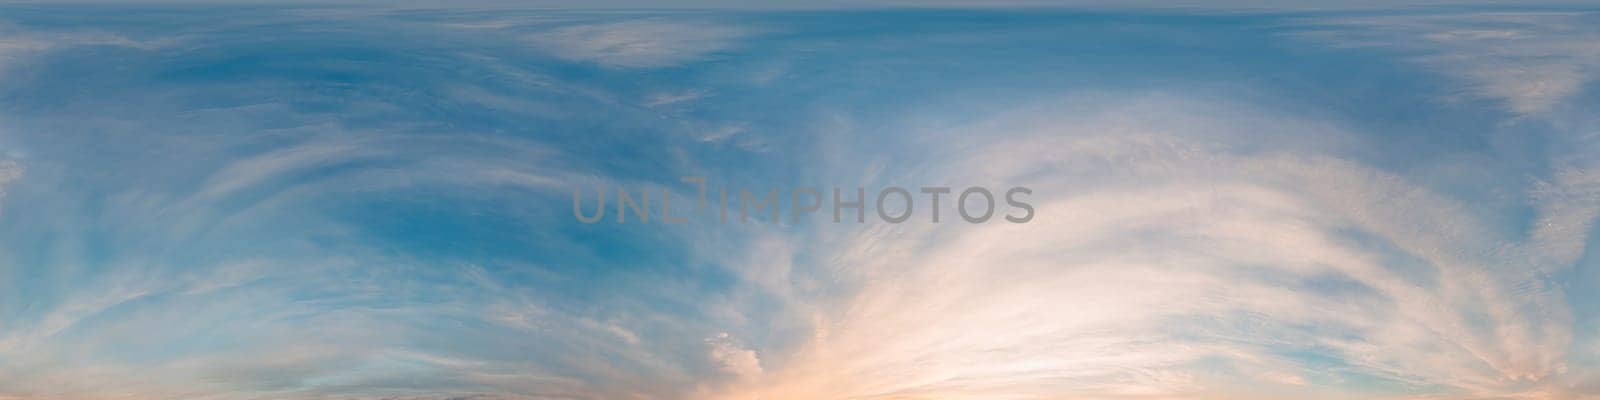 Dark Sunset sky panorama with glowing pink Cirrus clouds. HDR 360 seamless spherical panorama. Full zenith or sky dome in 3D, sky replacement for aerial drone panoramas. Climate and weather change. by panophotograph